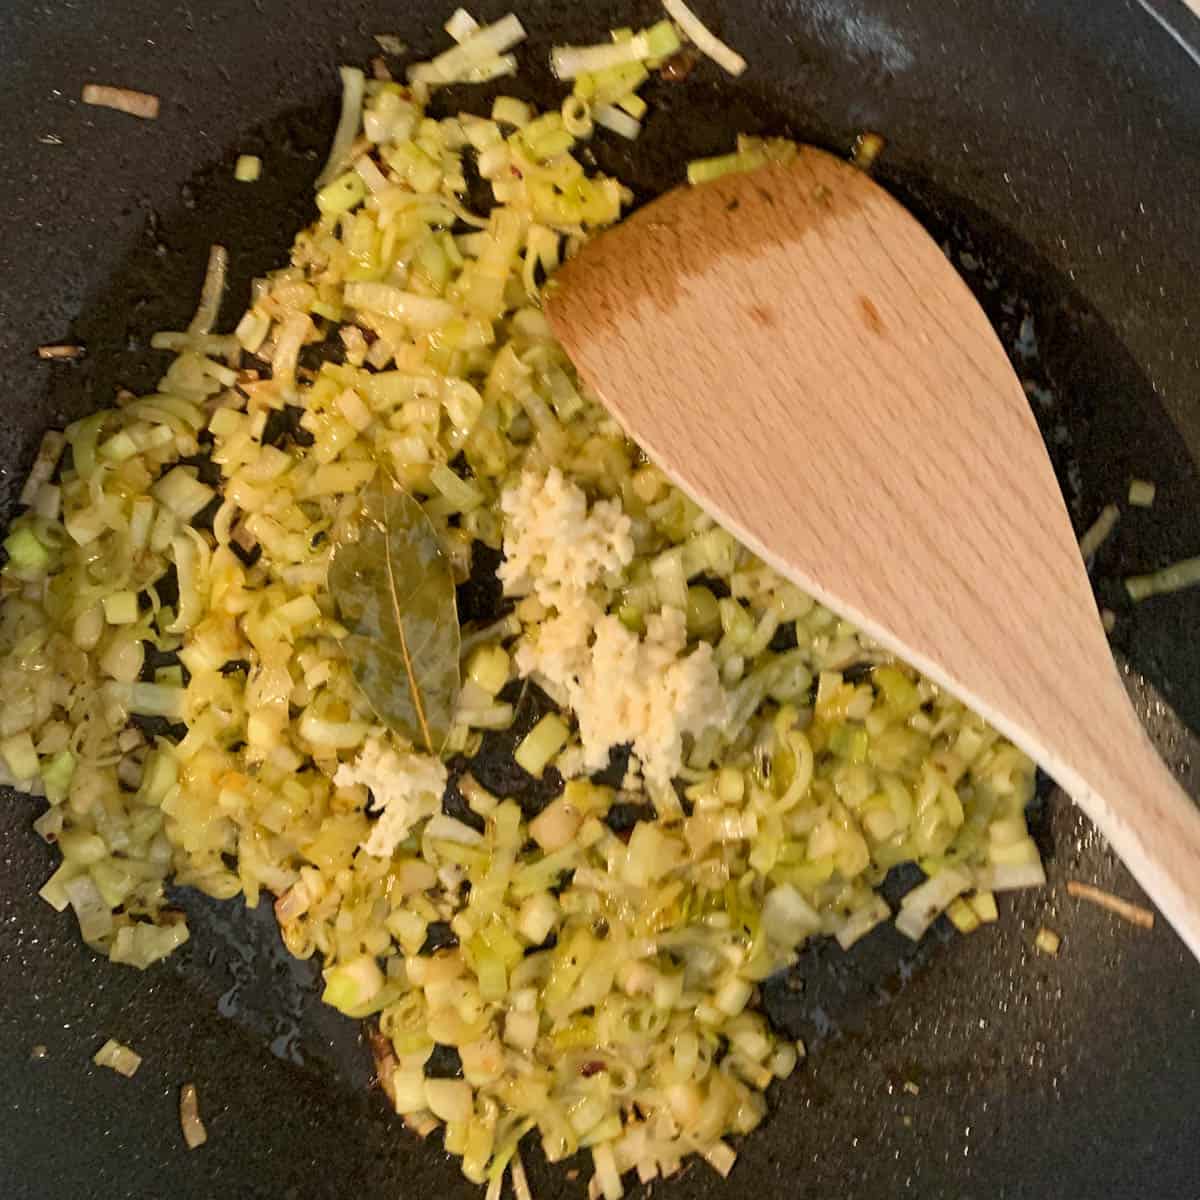 diced onions, minced garlic and spices in a frying pan